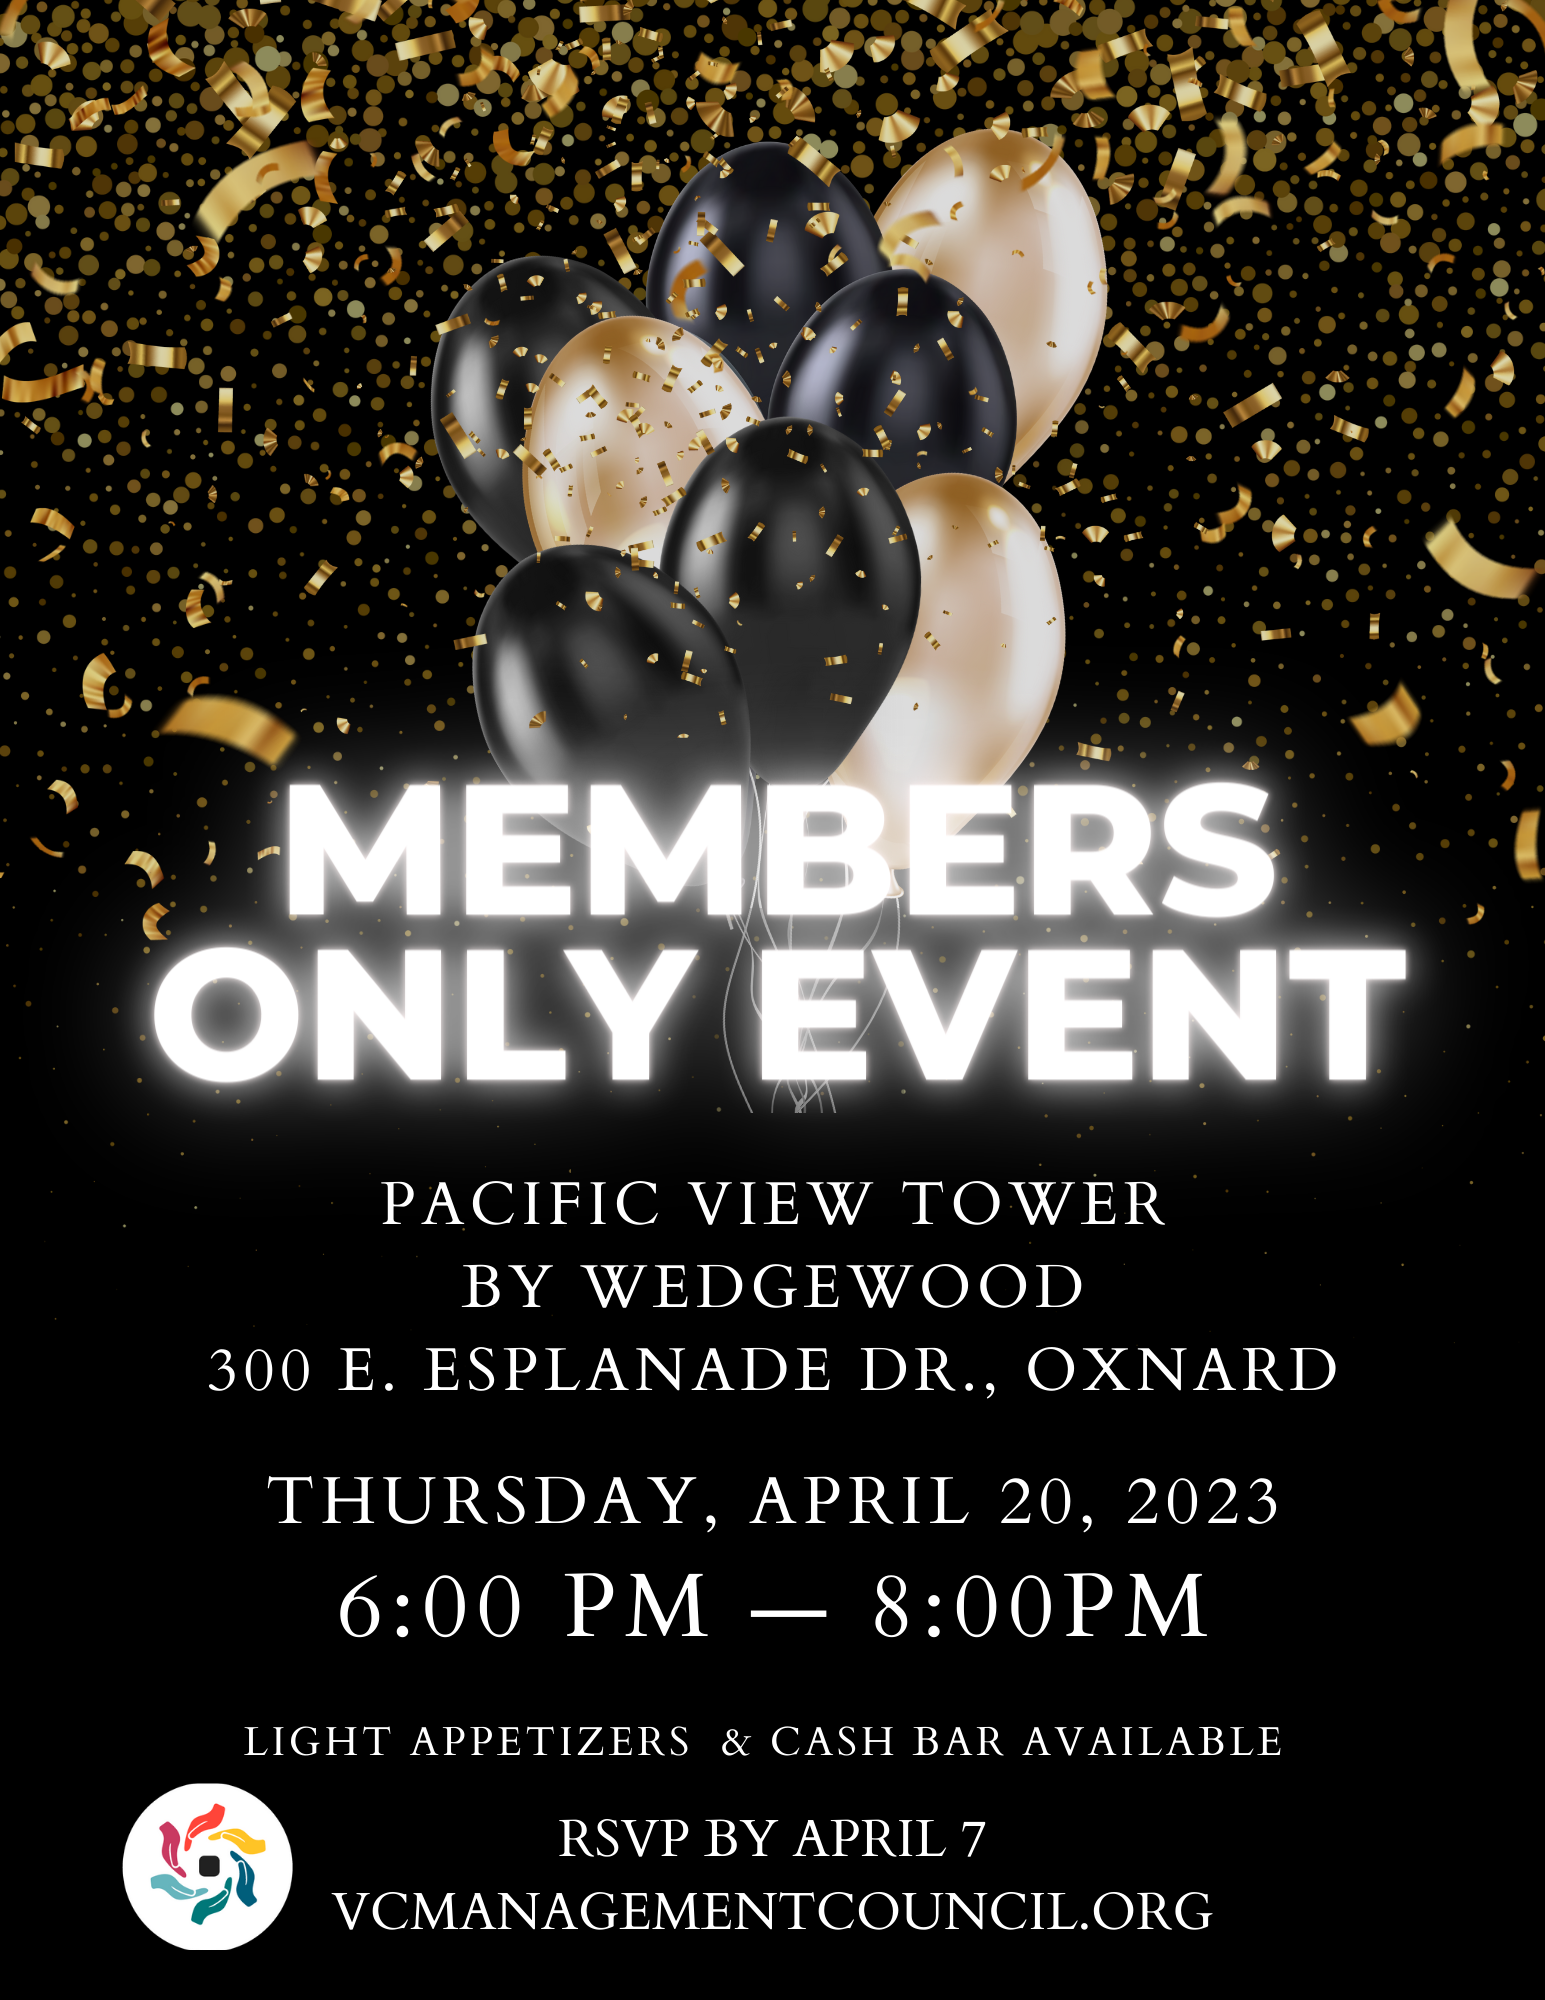 Members Only Event Flyer